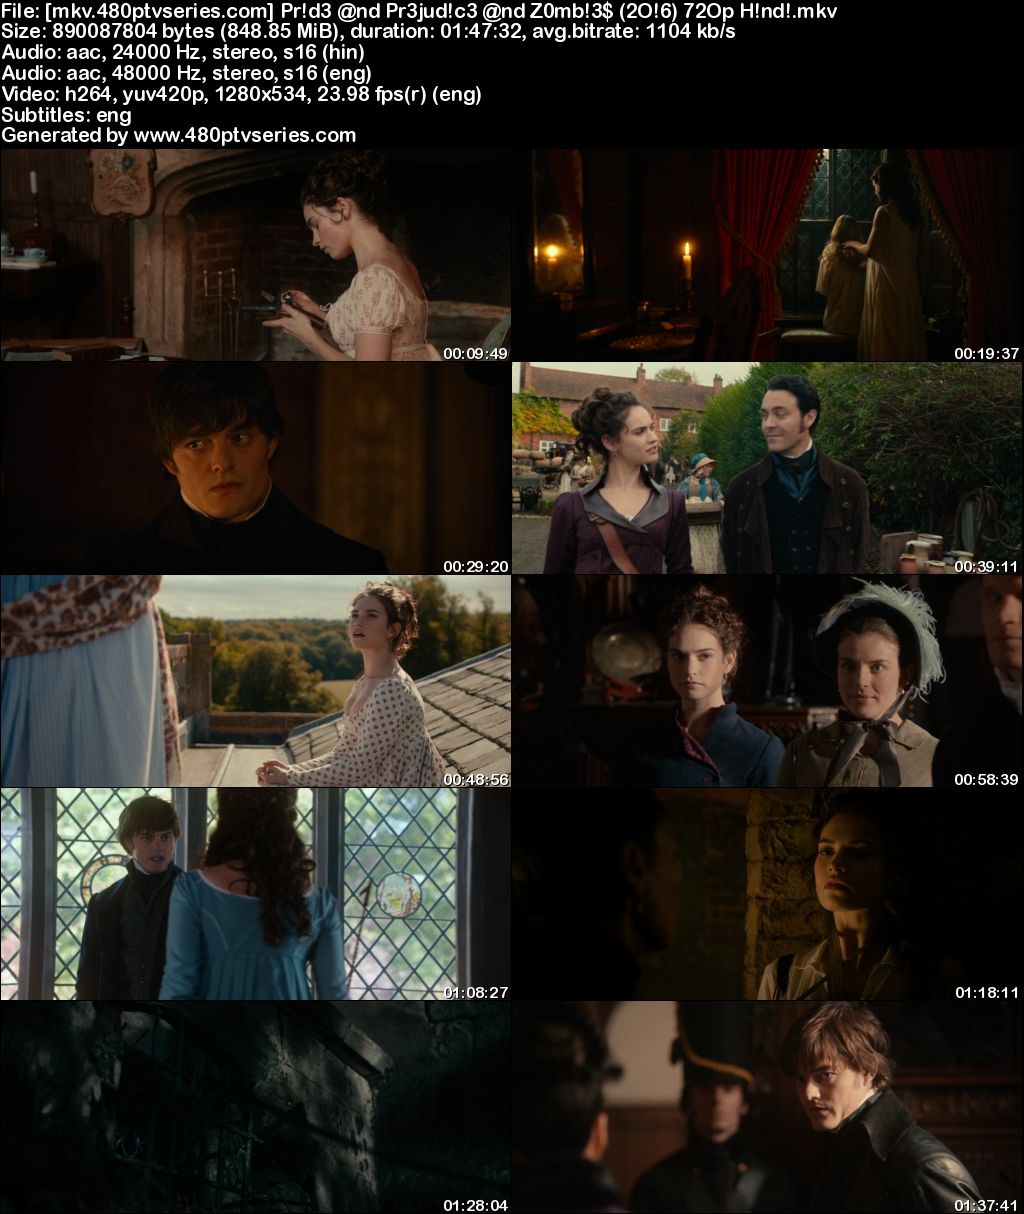 Watch Online Free Pride and Prejudice and Zombies (2016) Full Hindi Dual Audio Movie Download 480p 720p Bluray